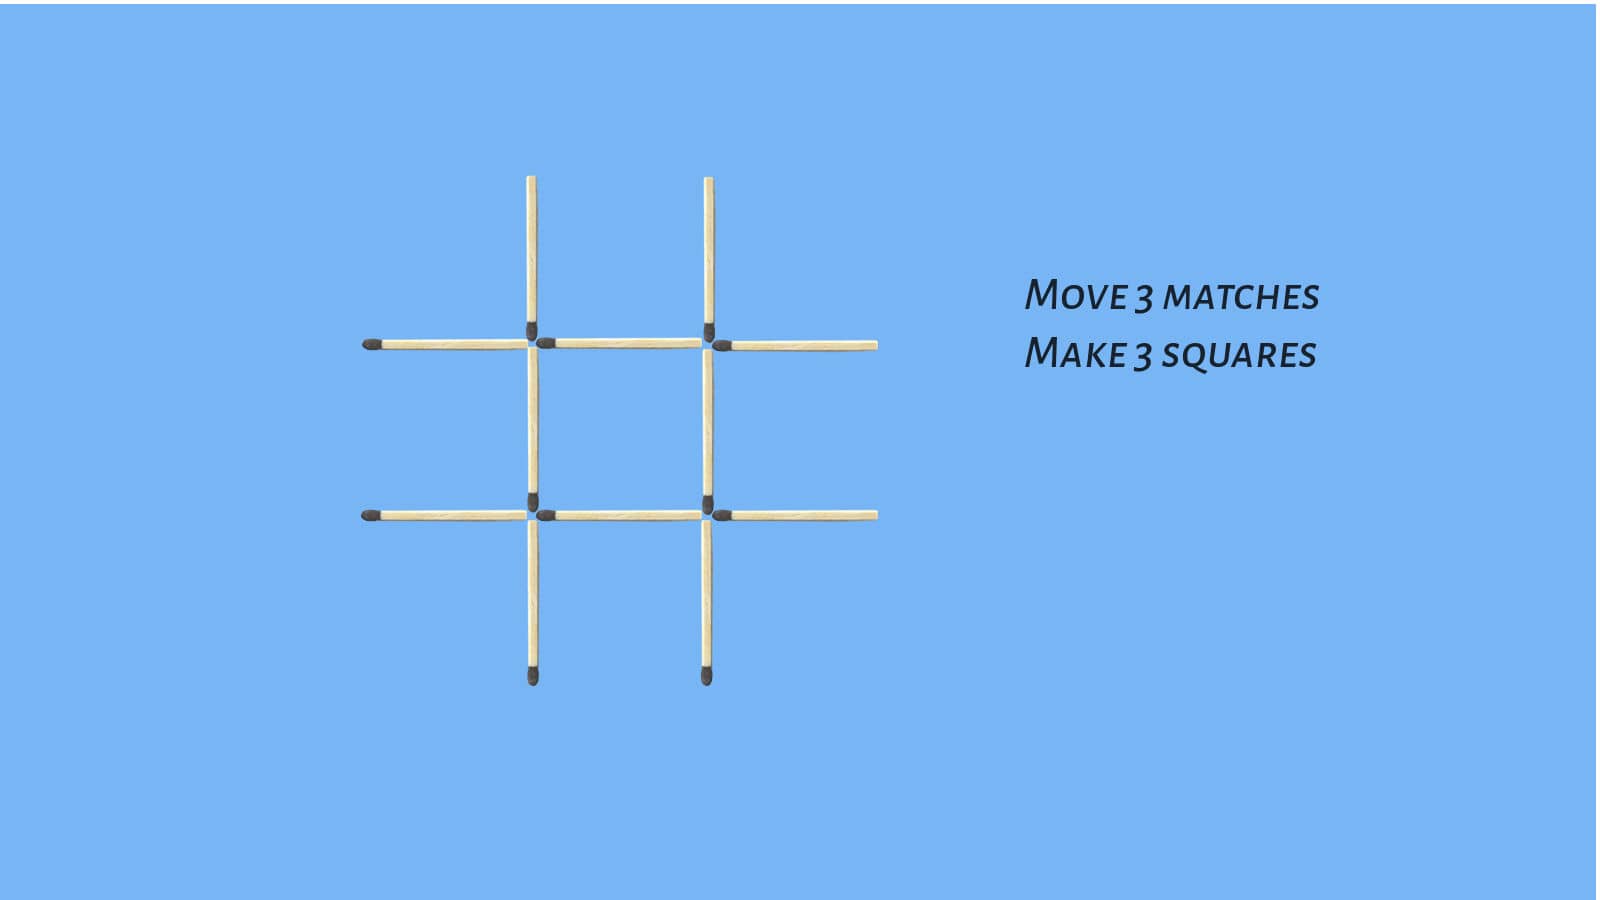 Move 3 matches to make 3 squares Tic Tac Toe matchstick puzzle